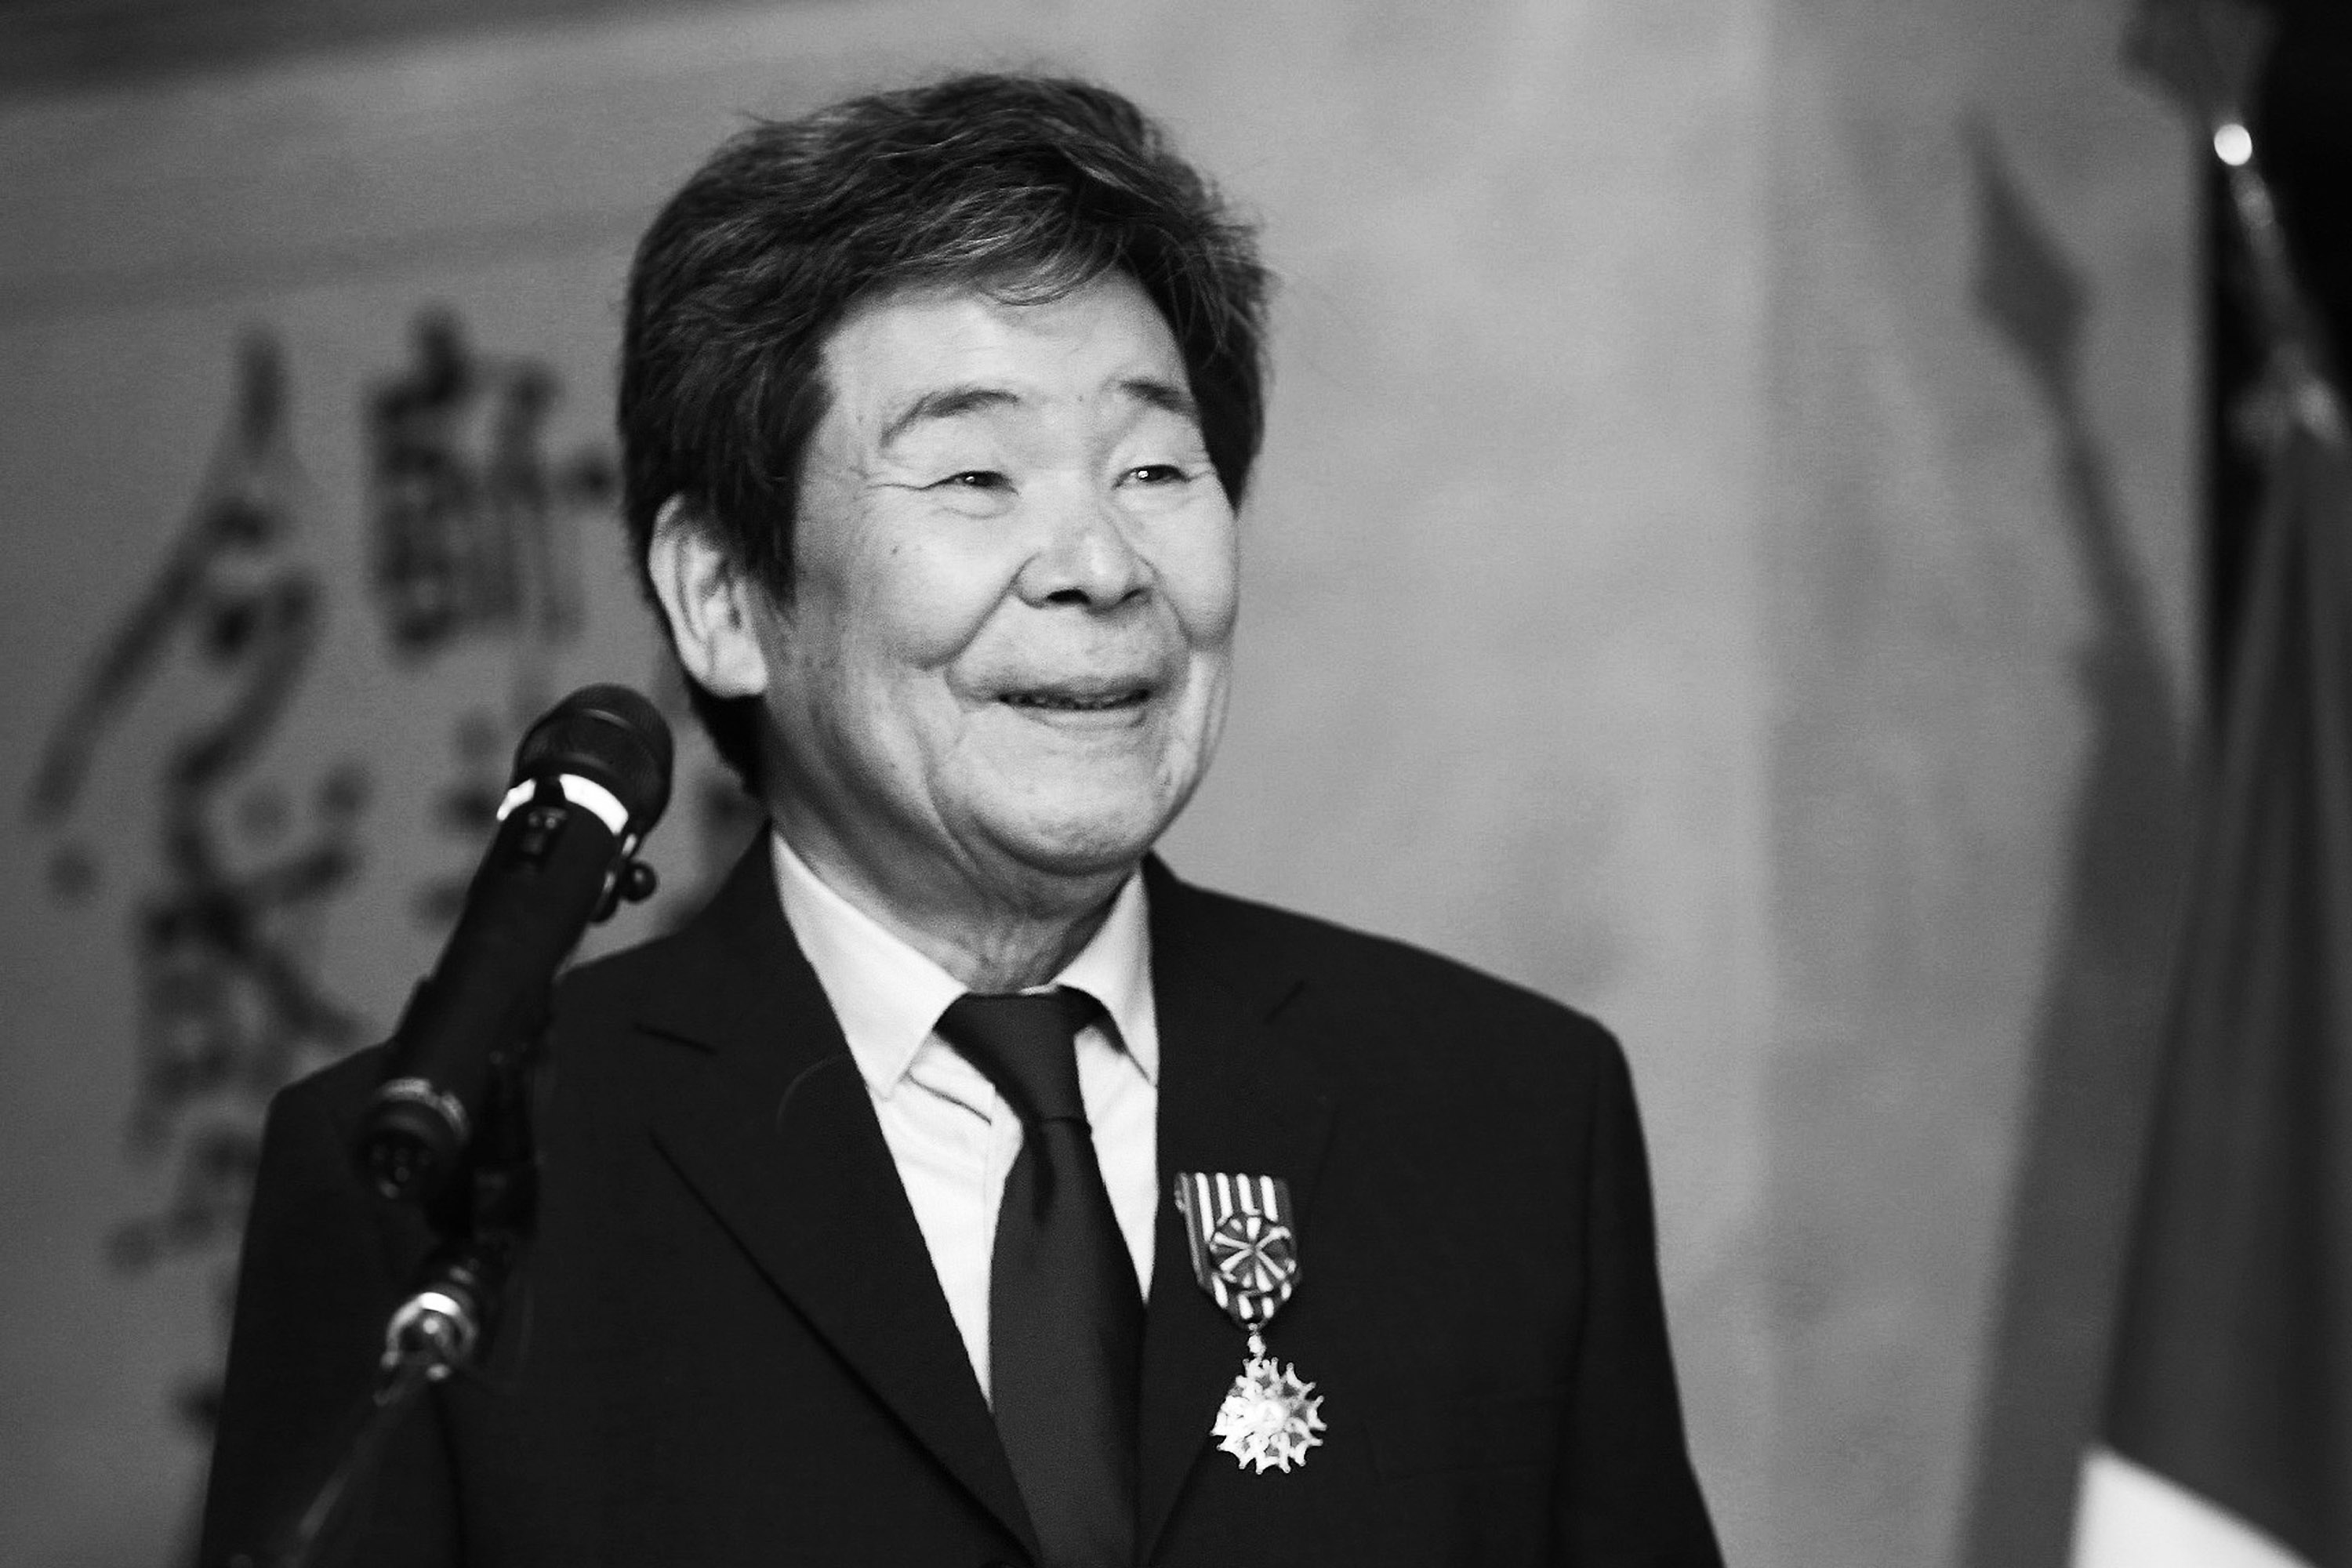 (FILES) This file picture taken on April 7, 2015 shows Japanese animation movie director Isao Takahata smiling as he received the "Officier of L'Ordre des Arts et des Letters" from the French ambassador to Japan at the French embassy in Tokyo. Oscar-nominated Japanese anime director Isao Takahata, who co-founded the Studio Ghibli and was best known for his work "Grave of the Fireflies", has died aged 82, the studio said on April 6, 2018. / AFP PHOTO / JIJI PRESS / JIJI PRESS / - Japan OUT